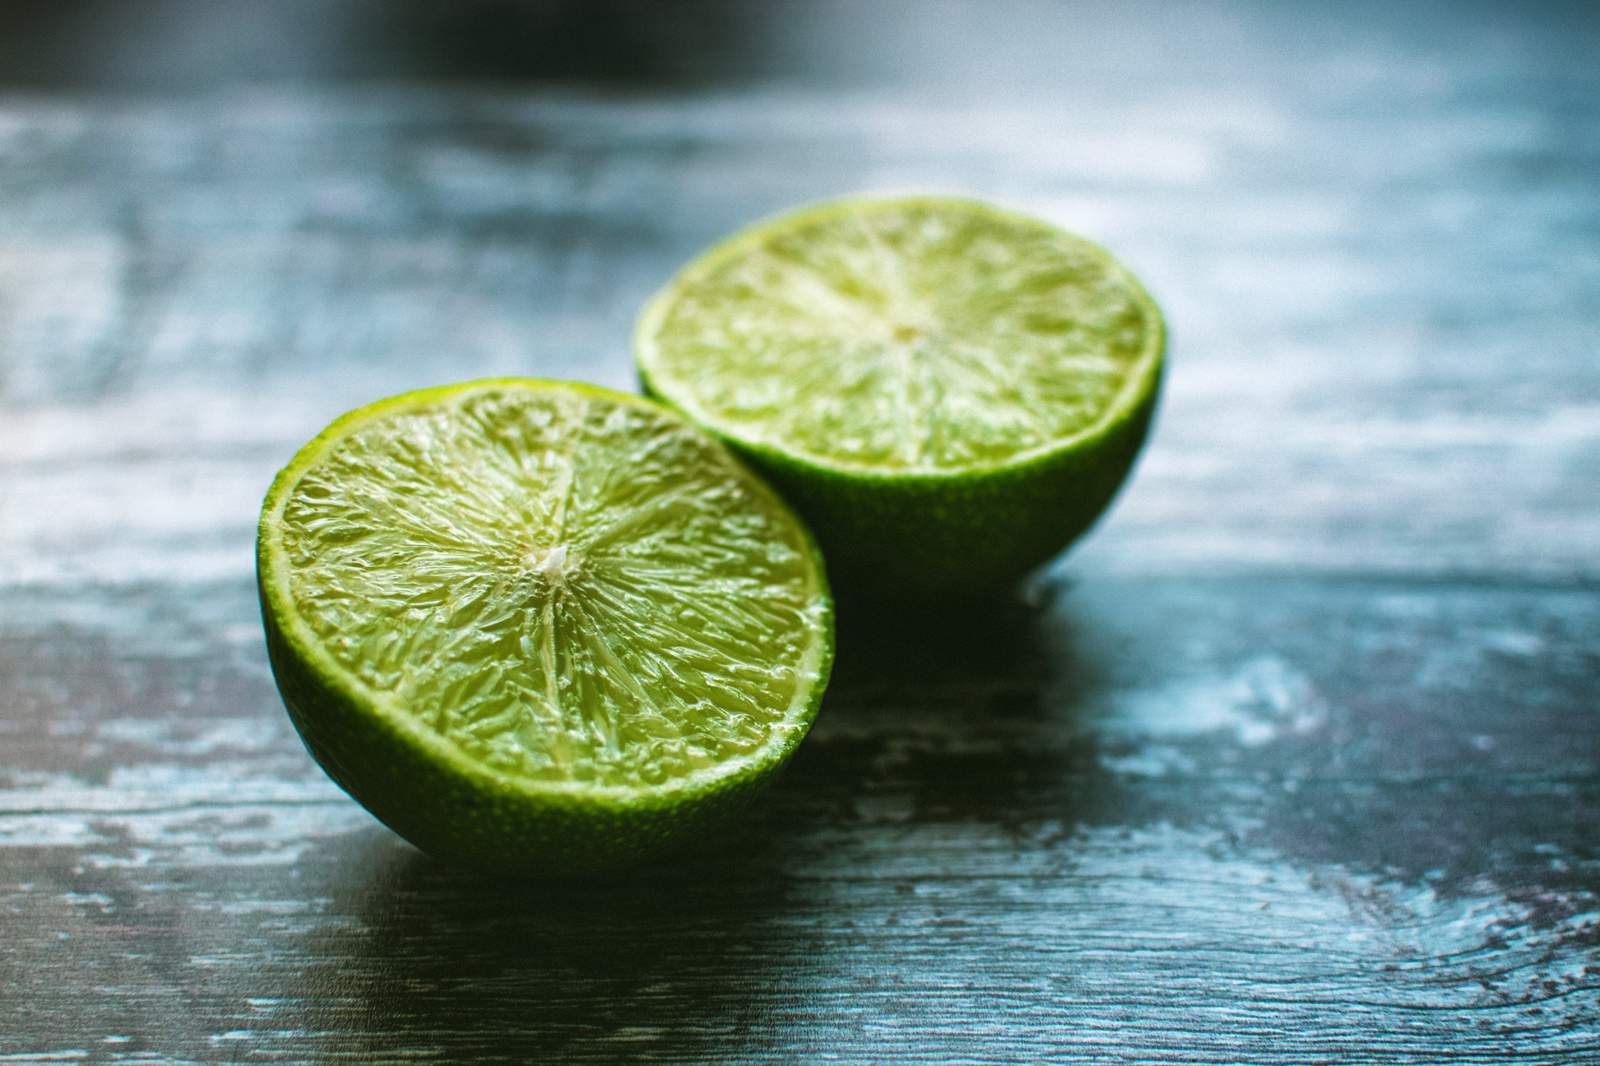 Looking to freshen up your beauty routine? Try lemons and limes